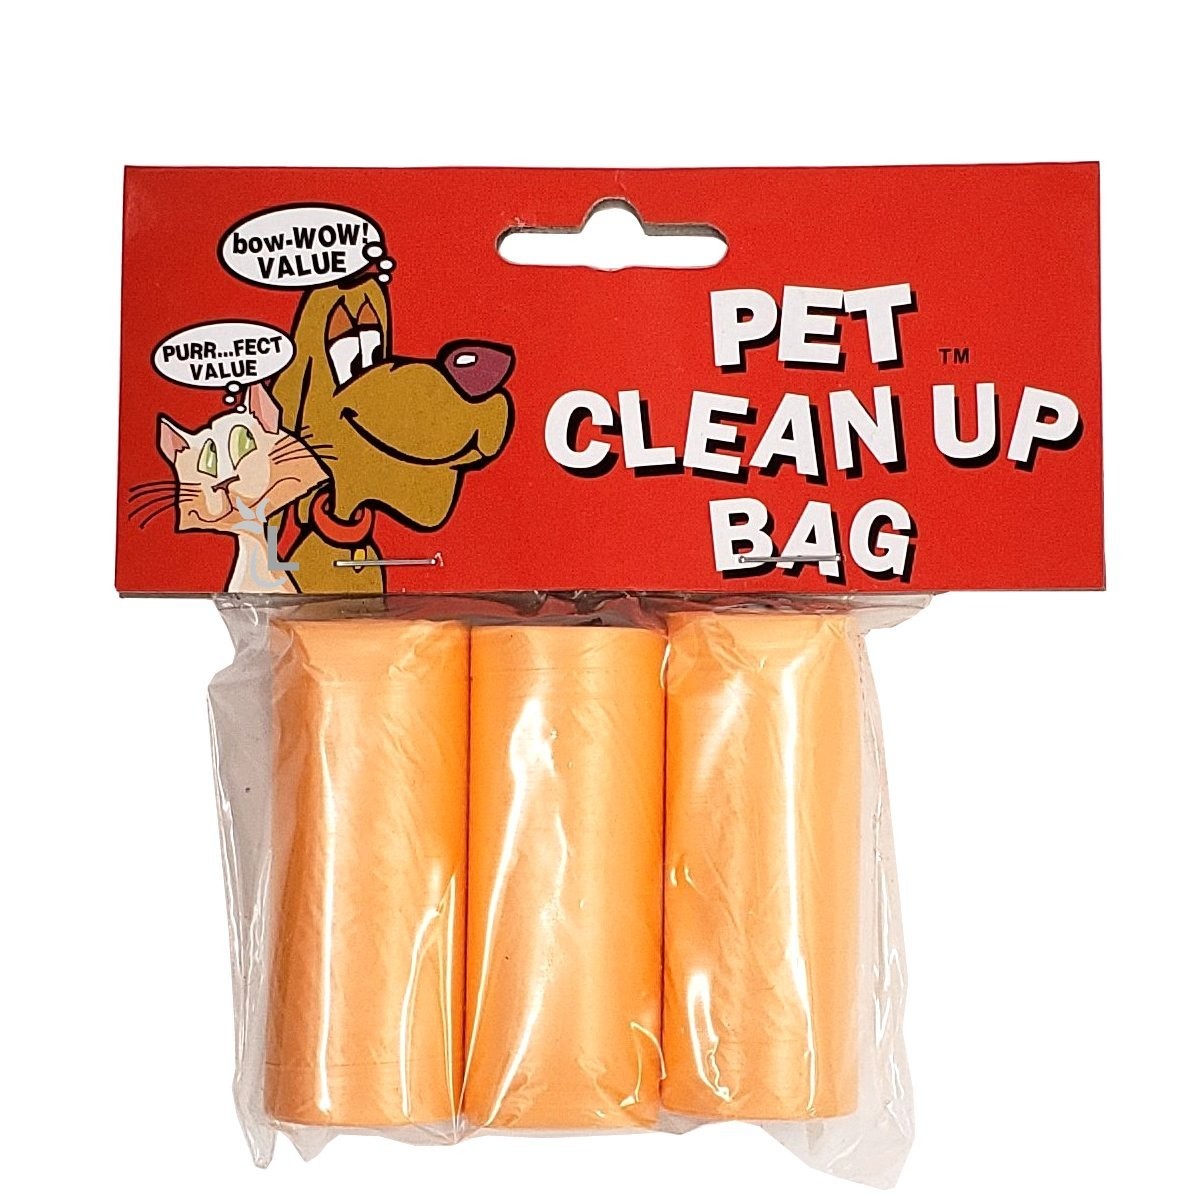 BOW-WOW VALUE PET CLEAN UP BAGS 3pk